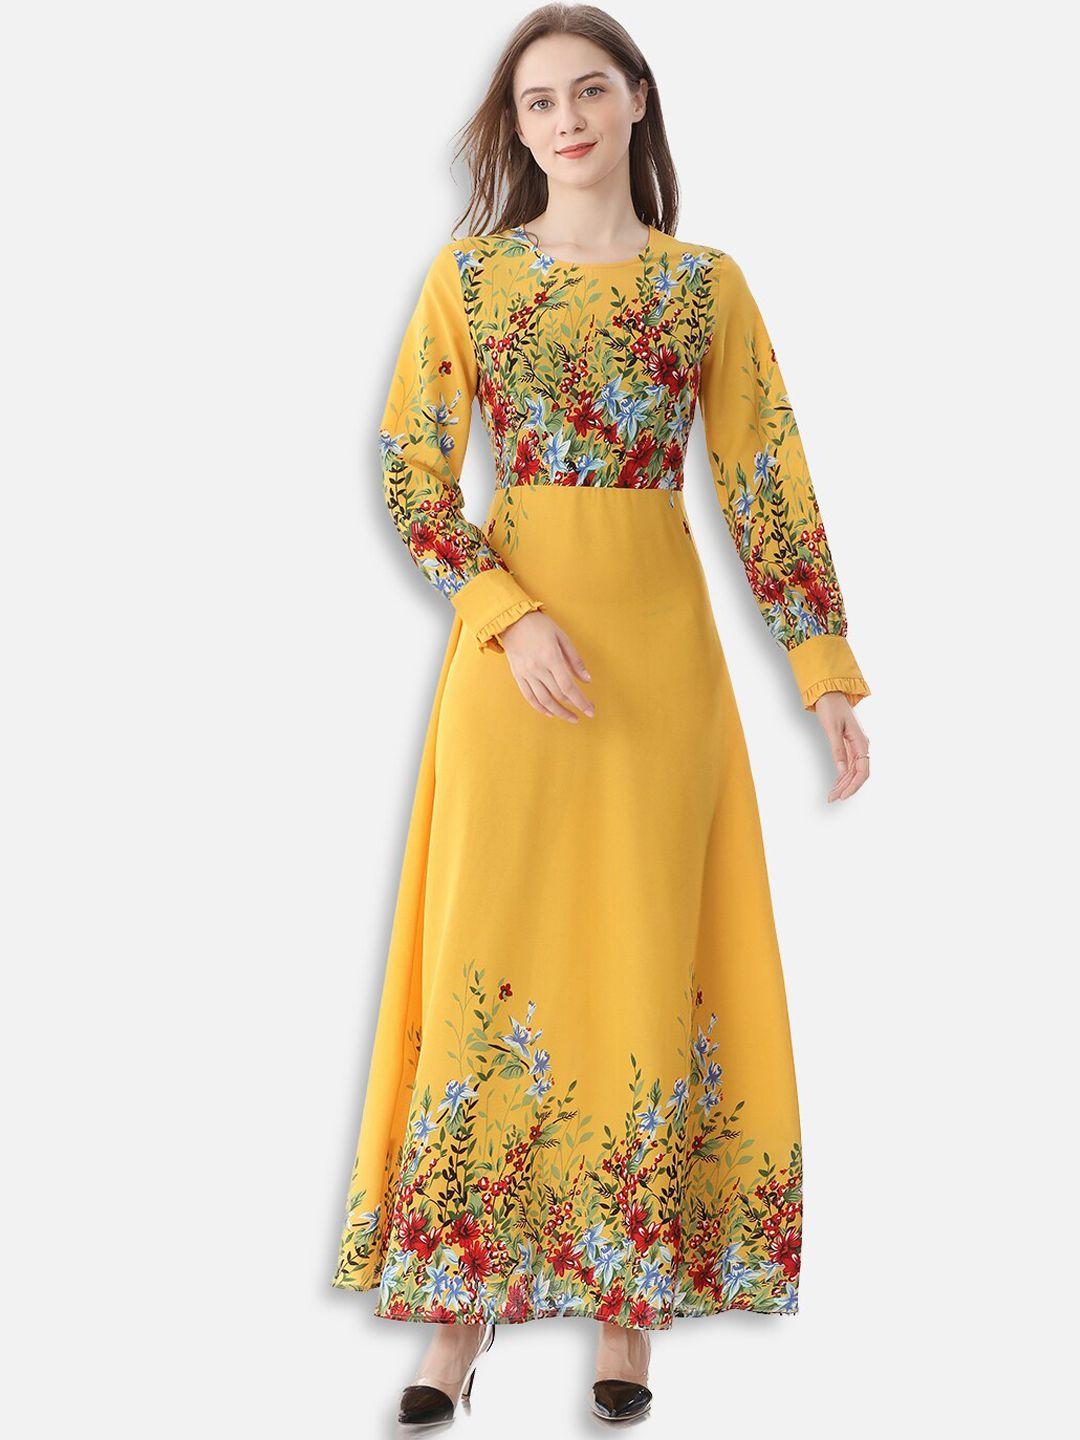 jc collection yellow floral maxi dress